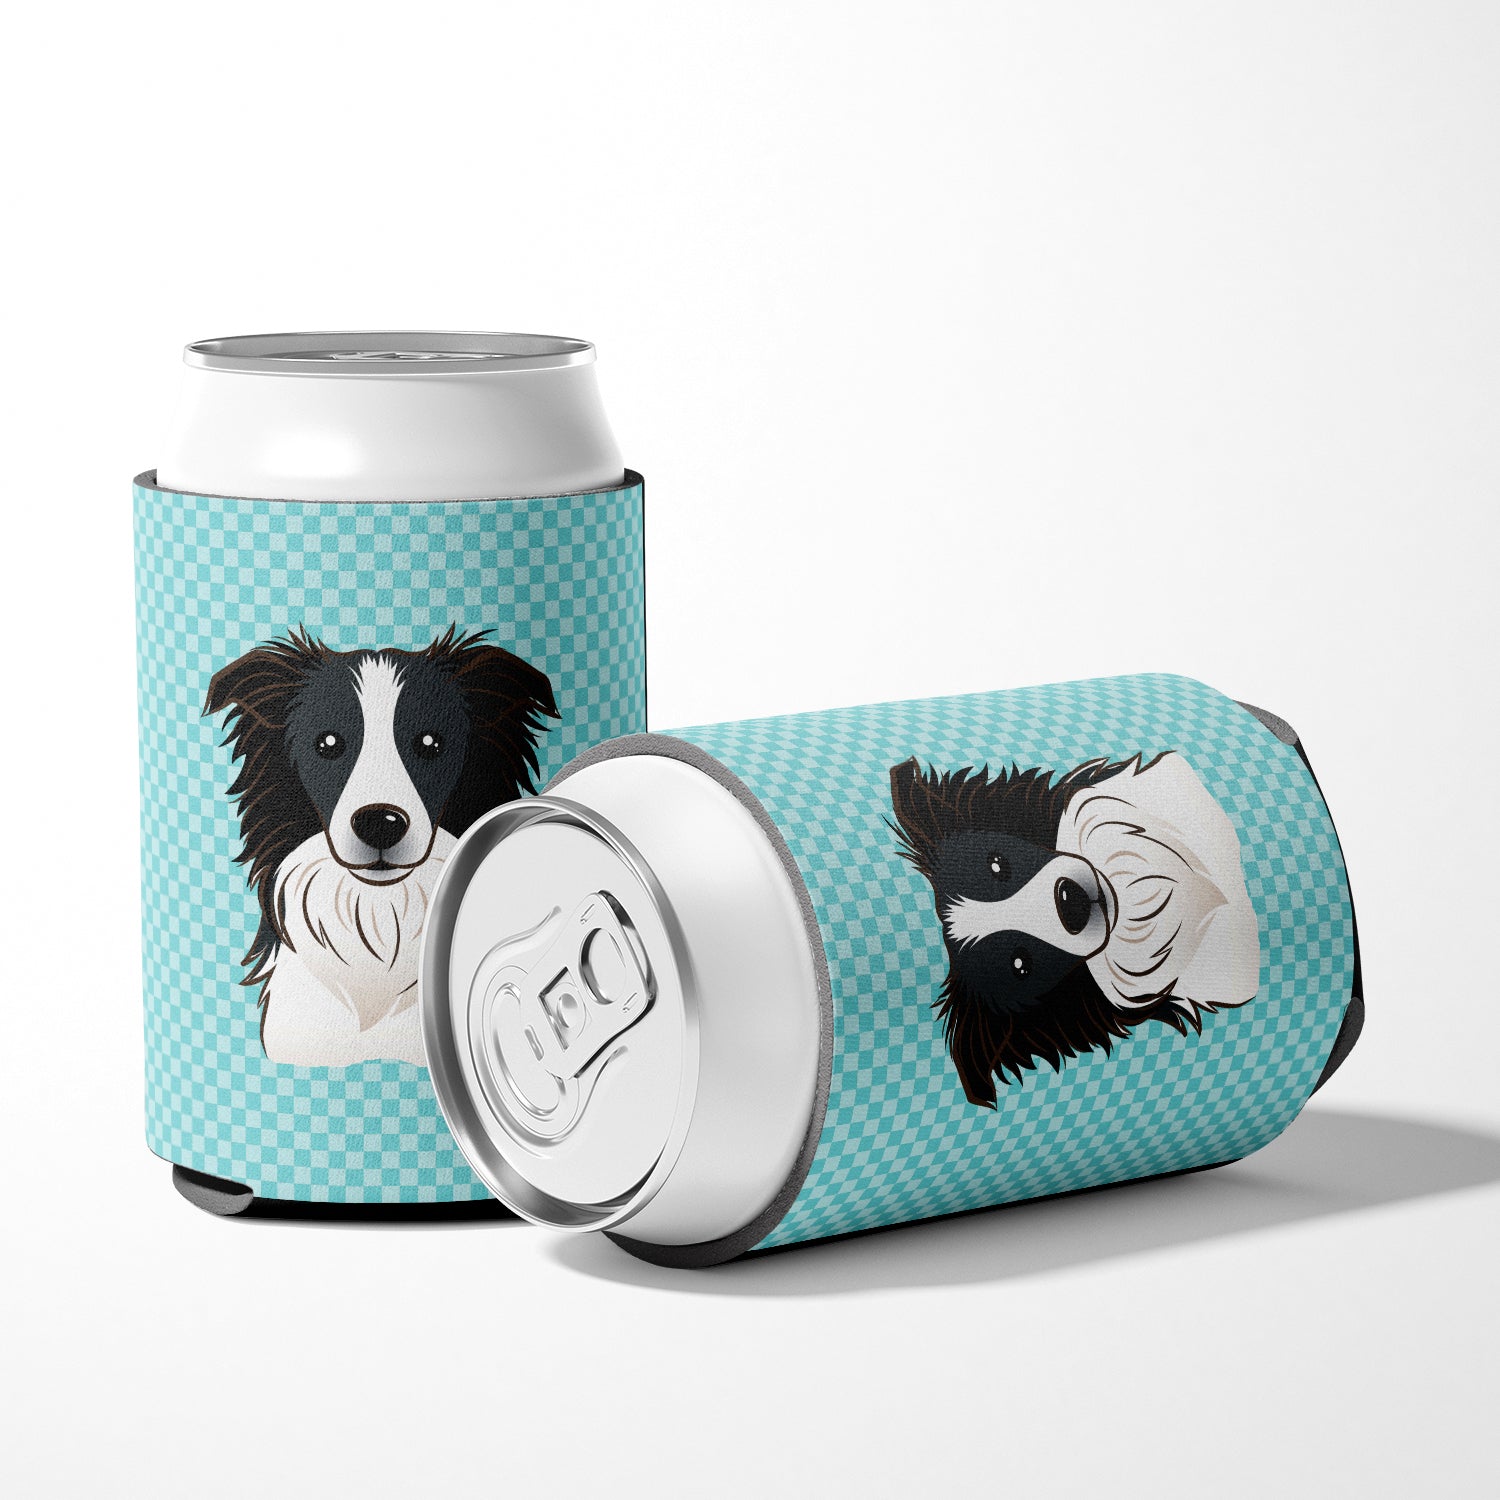 Checkerboard Blue Border Collie Can or Bottle Hugger BB1179CC.